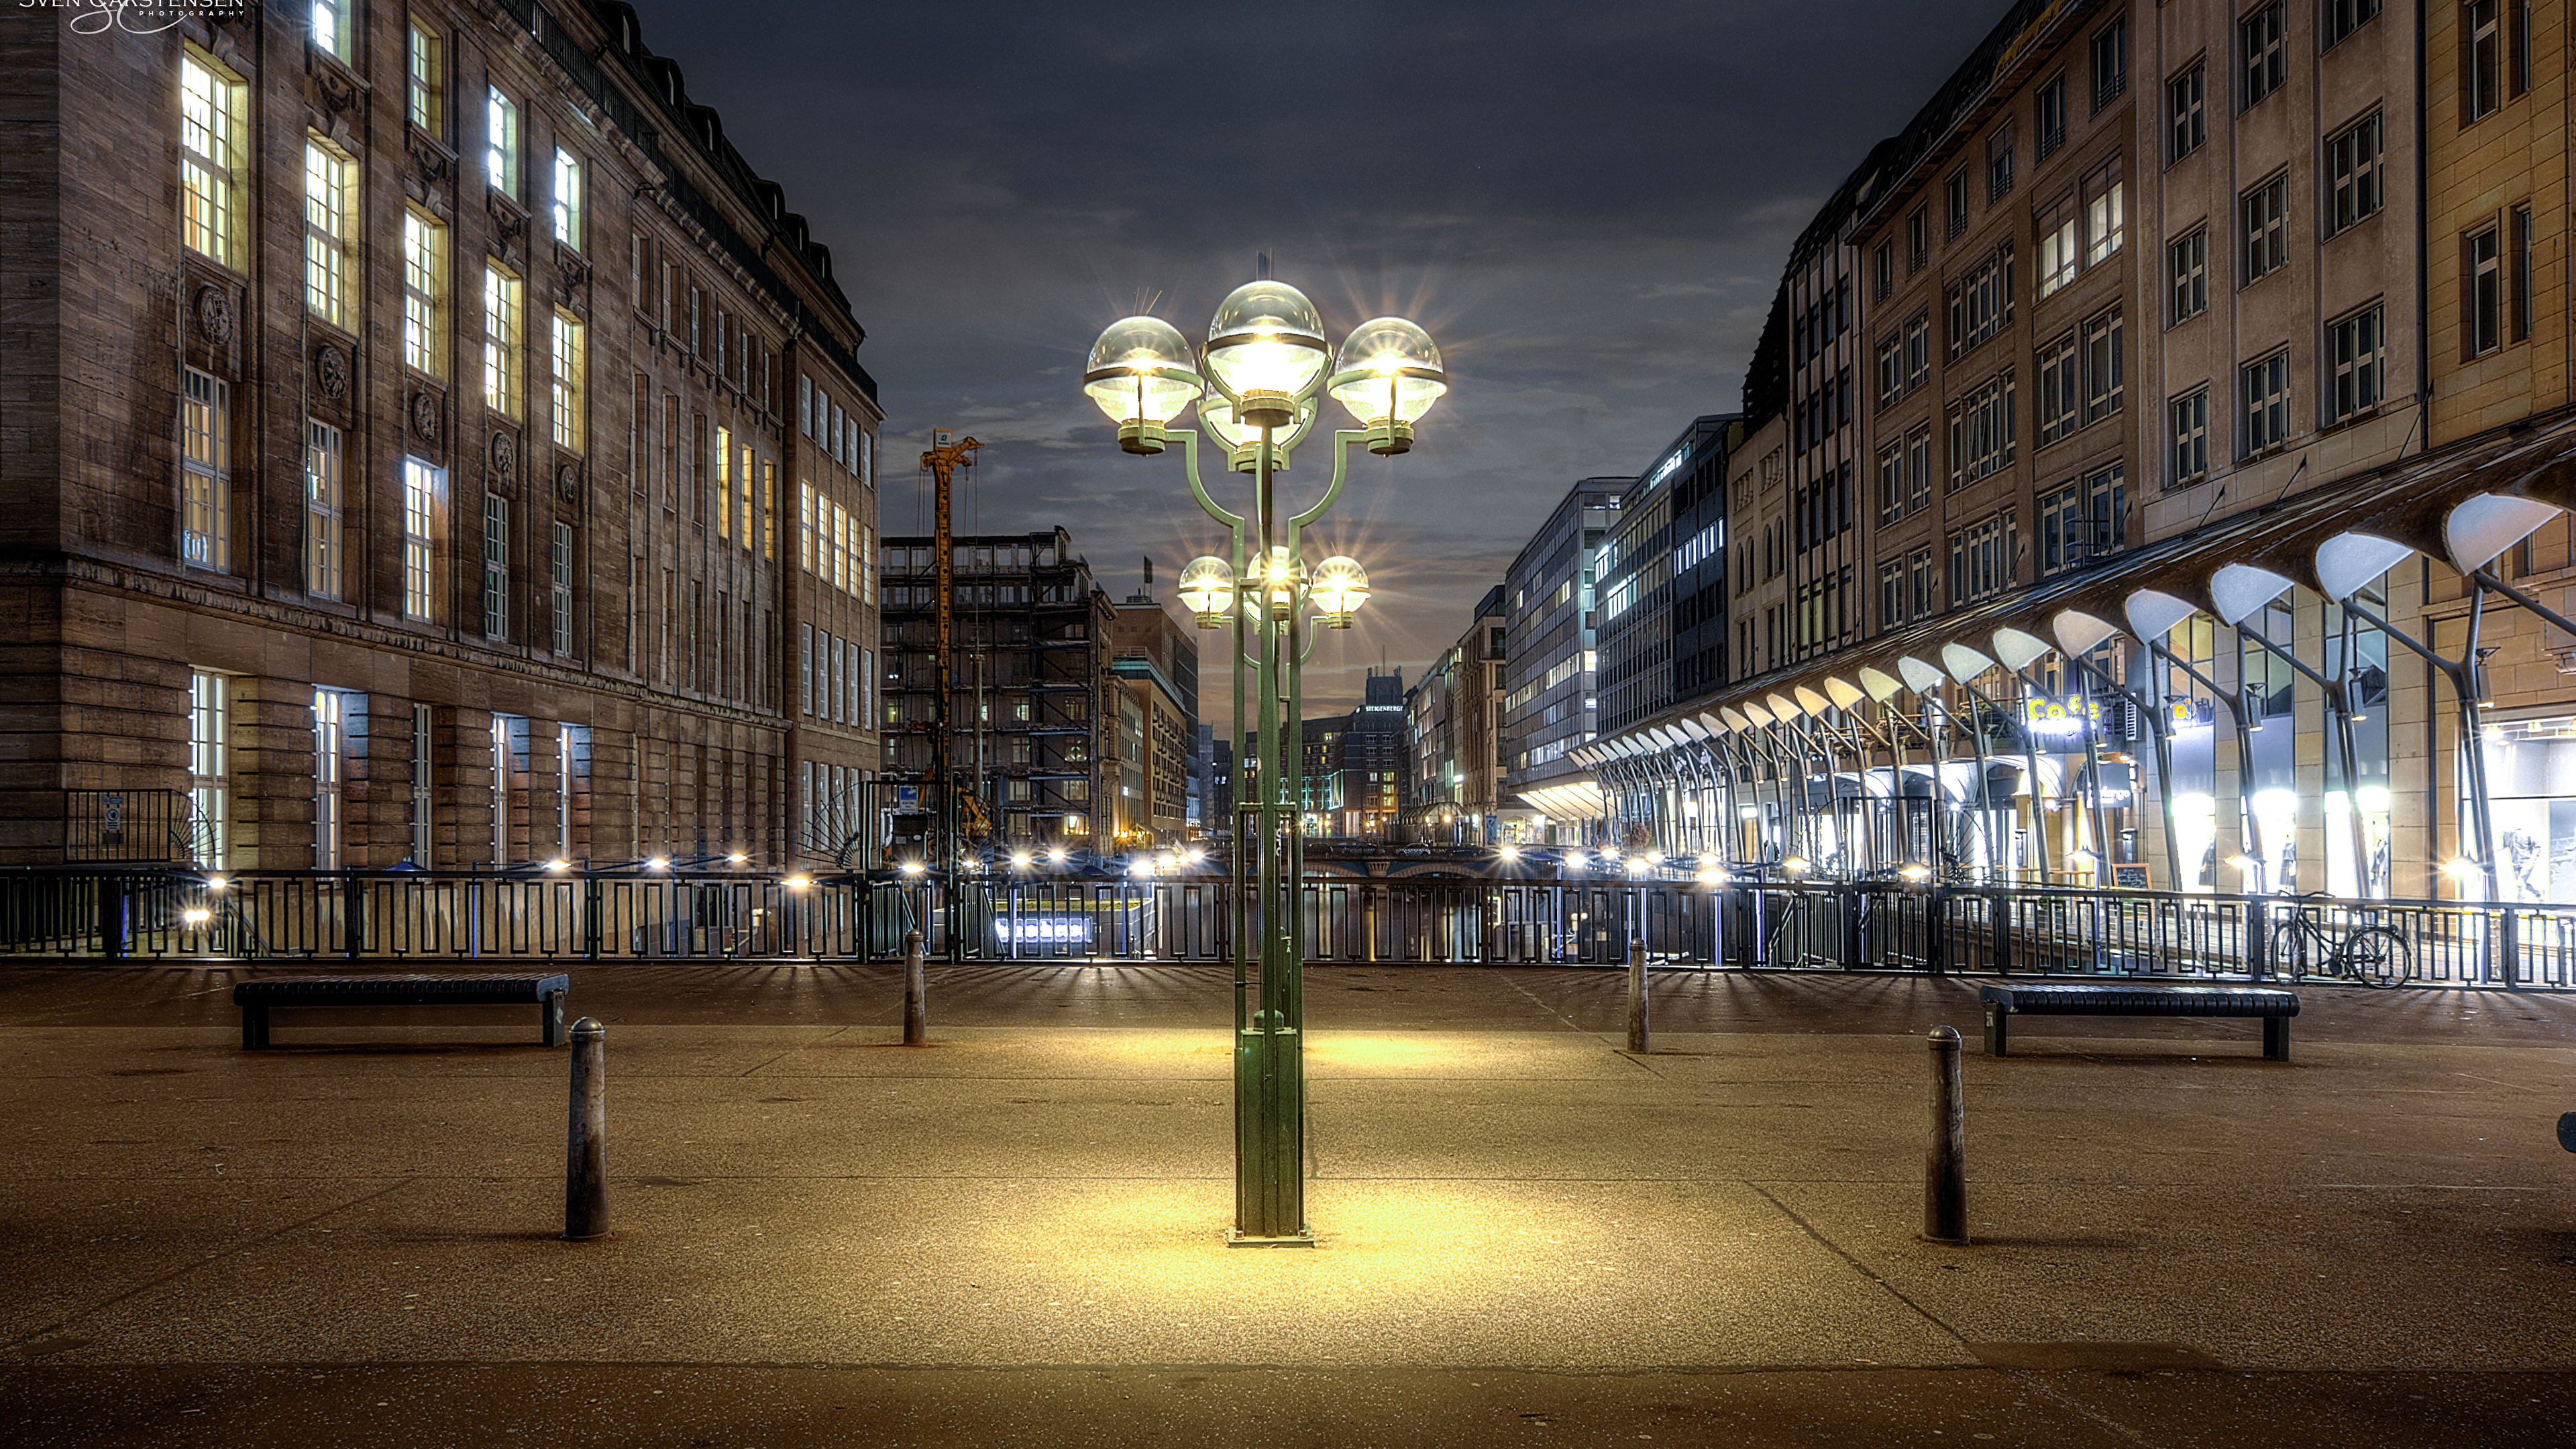 Lighted Street Lights in The Middle of The City During Night Time. Wallpaper in 3840x2160 Resolution